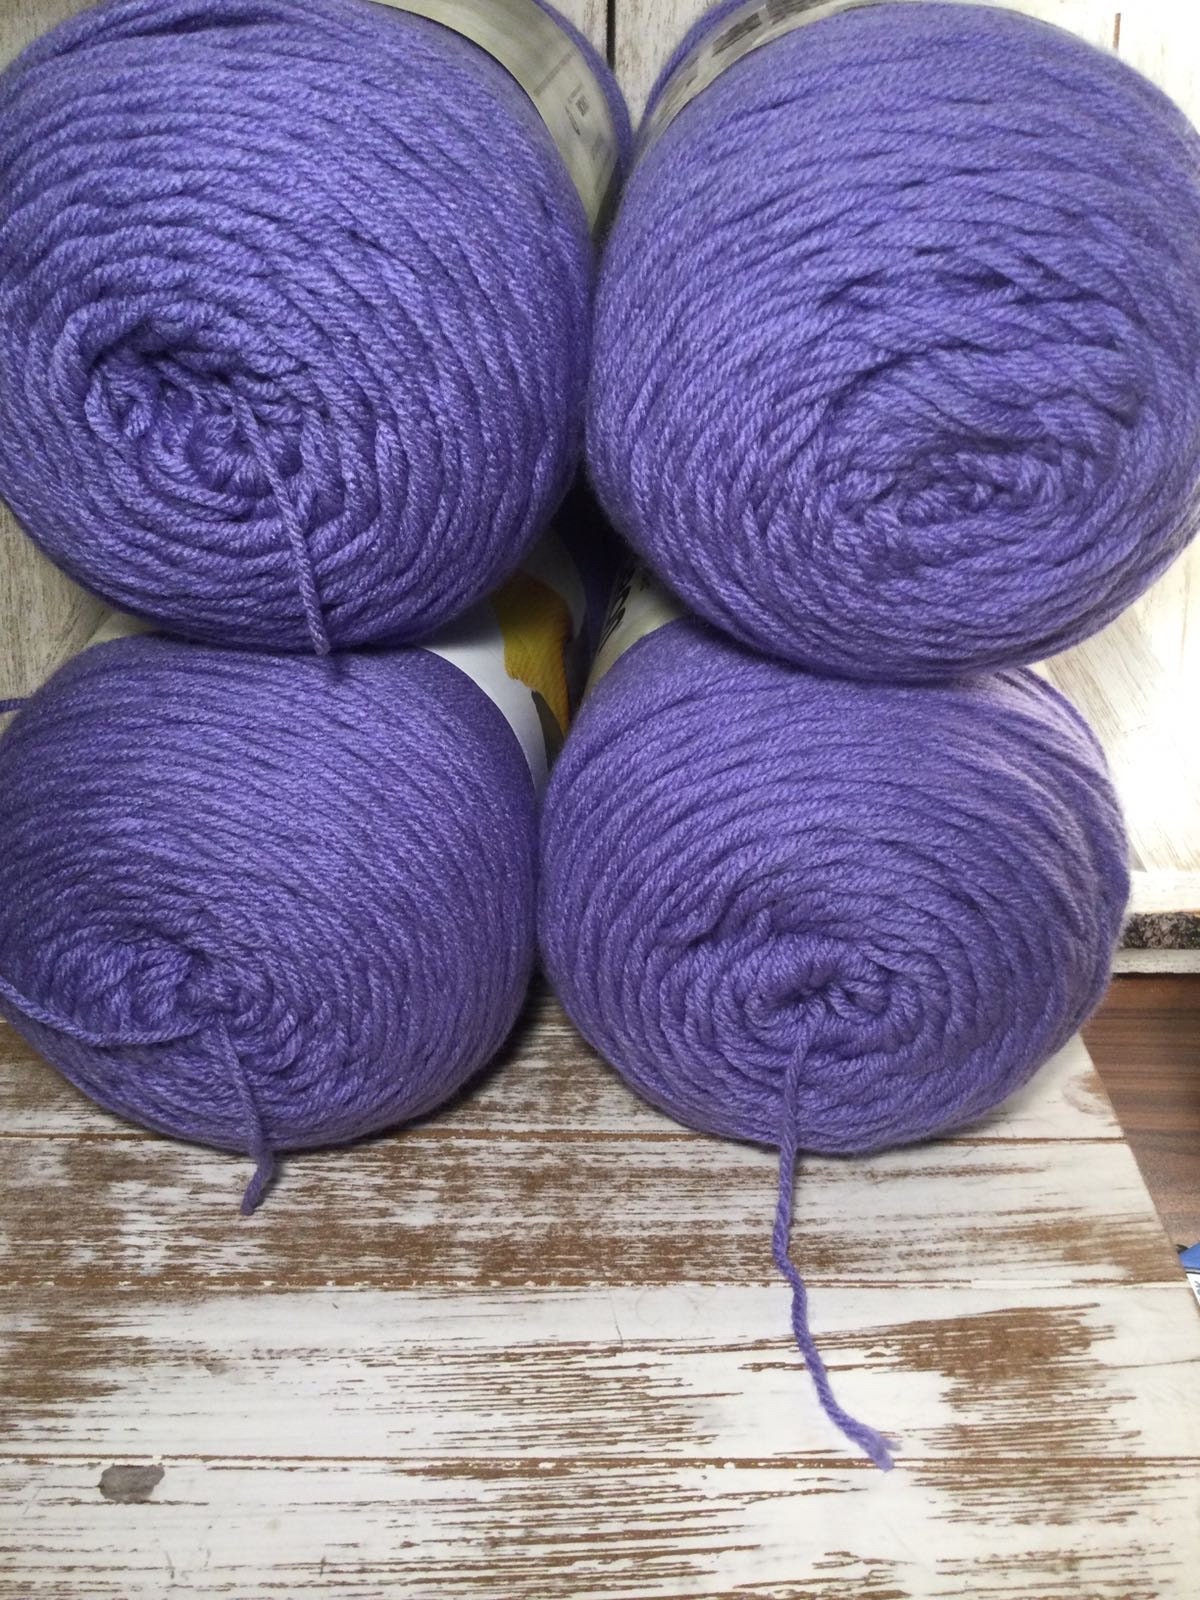  CARON Cinnamon Swirl Cakes Colour is Lilac and Lime